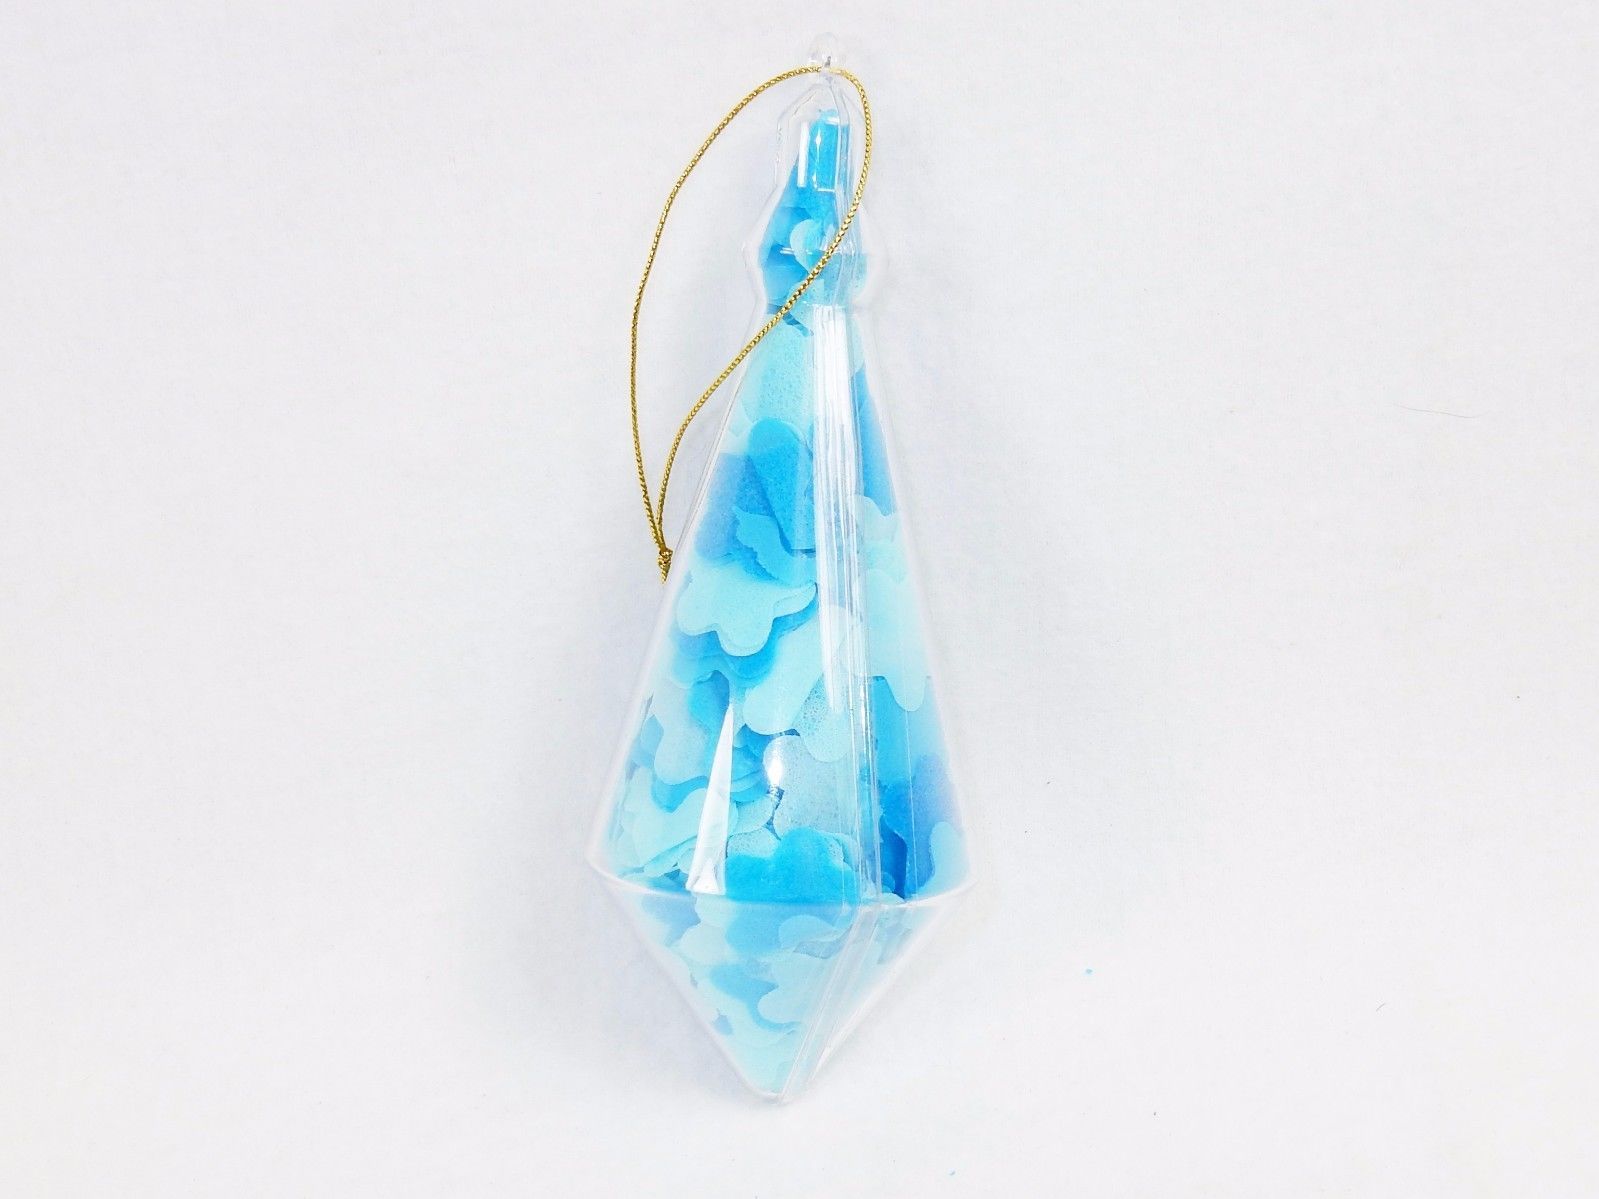 Holiday Ornament w/Blue Confetti Bath Soap, Ice Crystal Shaped, Floral Scented - $4.85